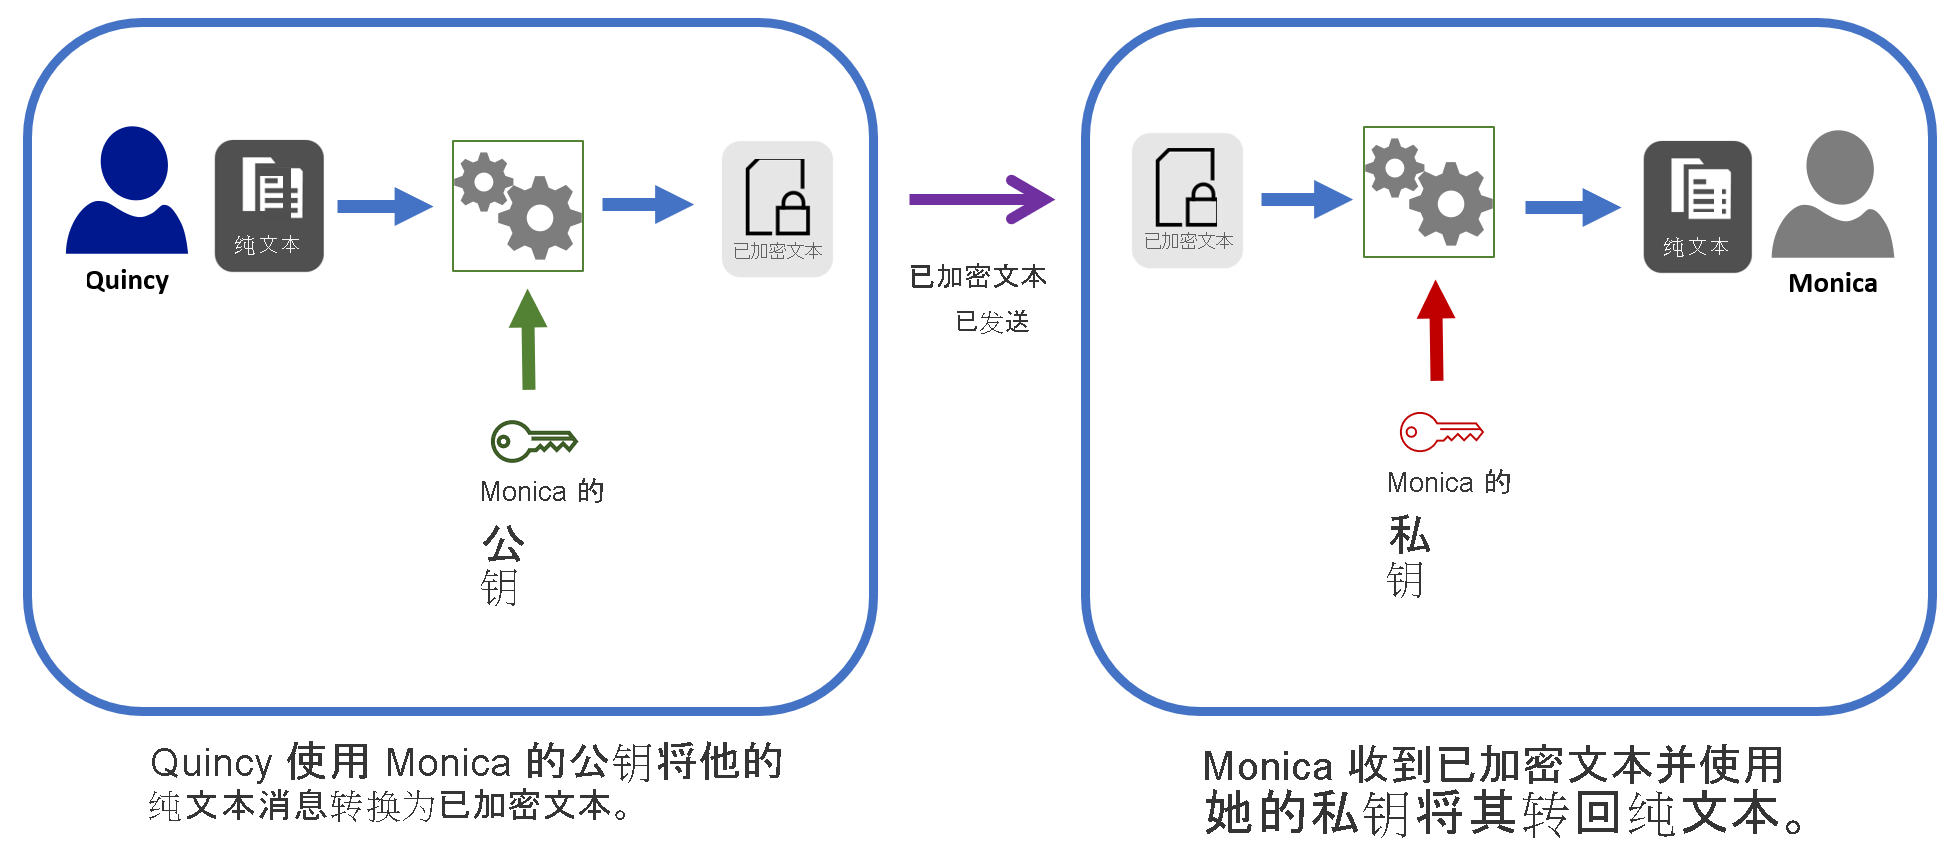 This diagram shows the process of encrypting a message using Monica’s public key, and Monica decrypting the ciphertext using her private key.